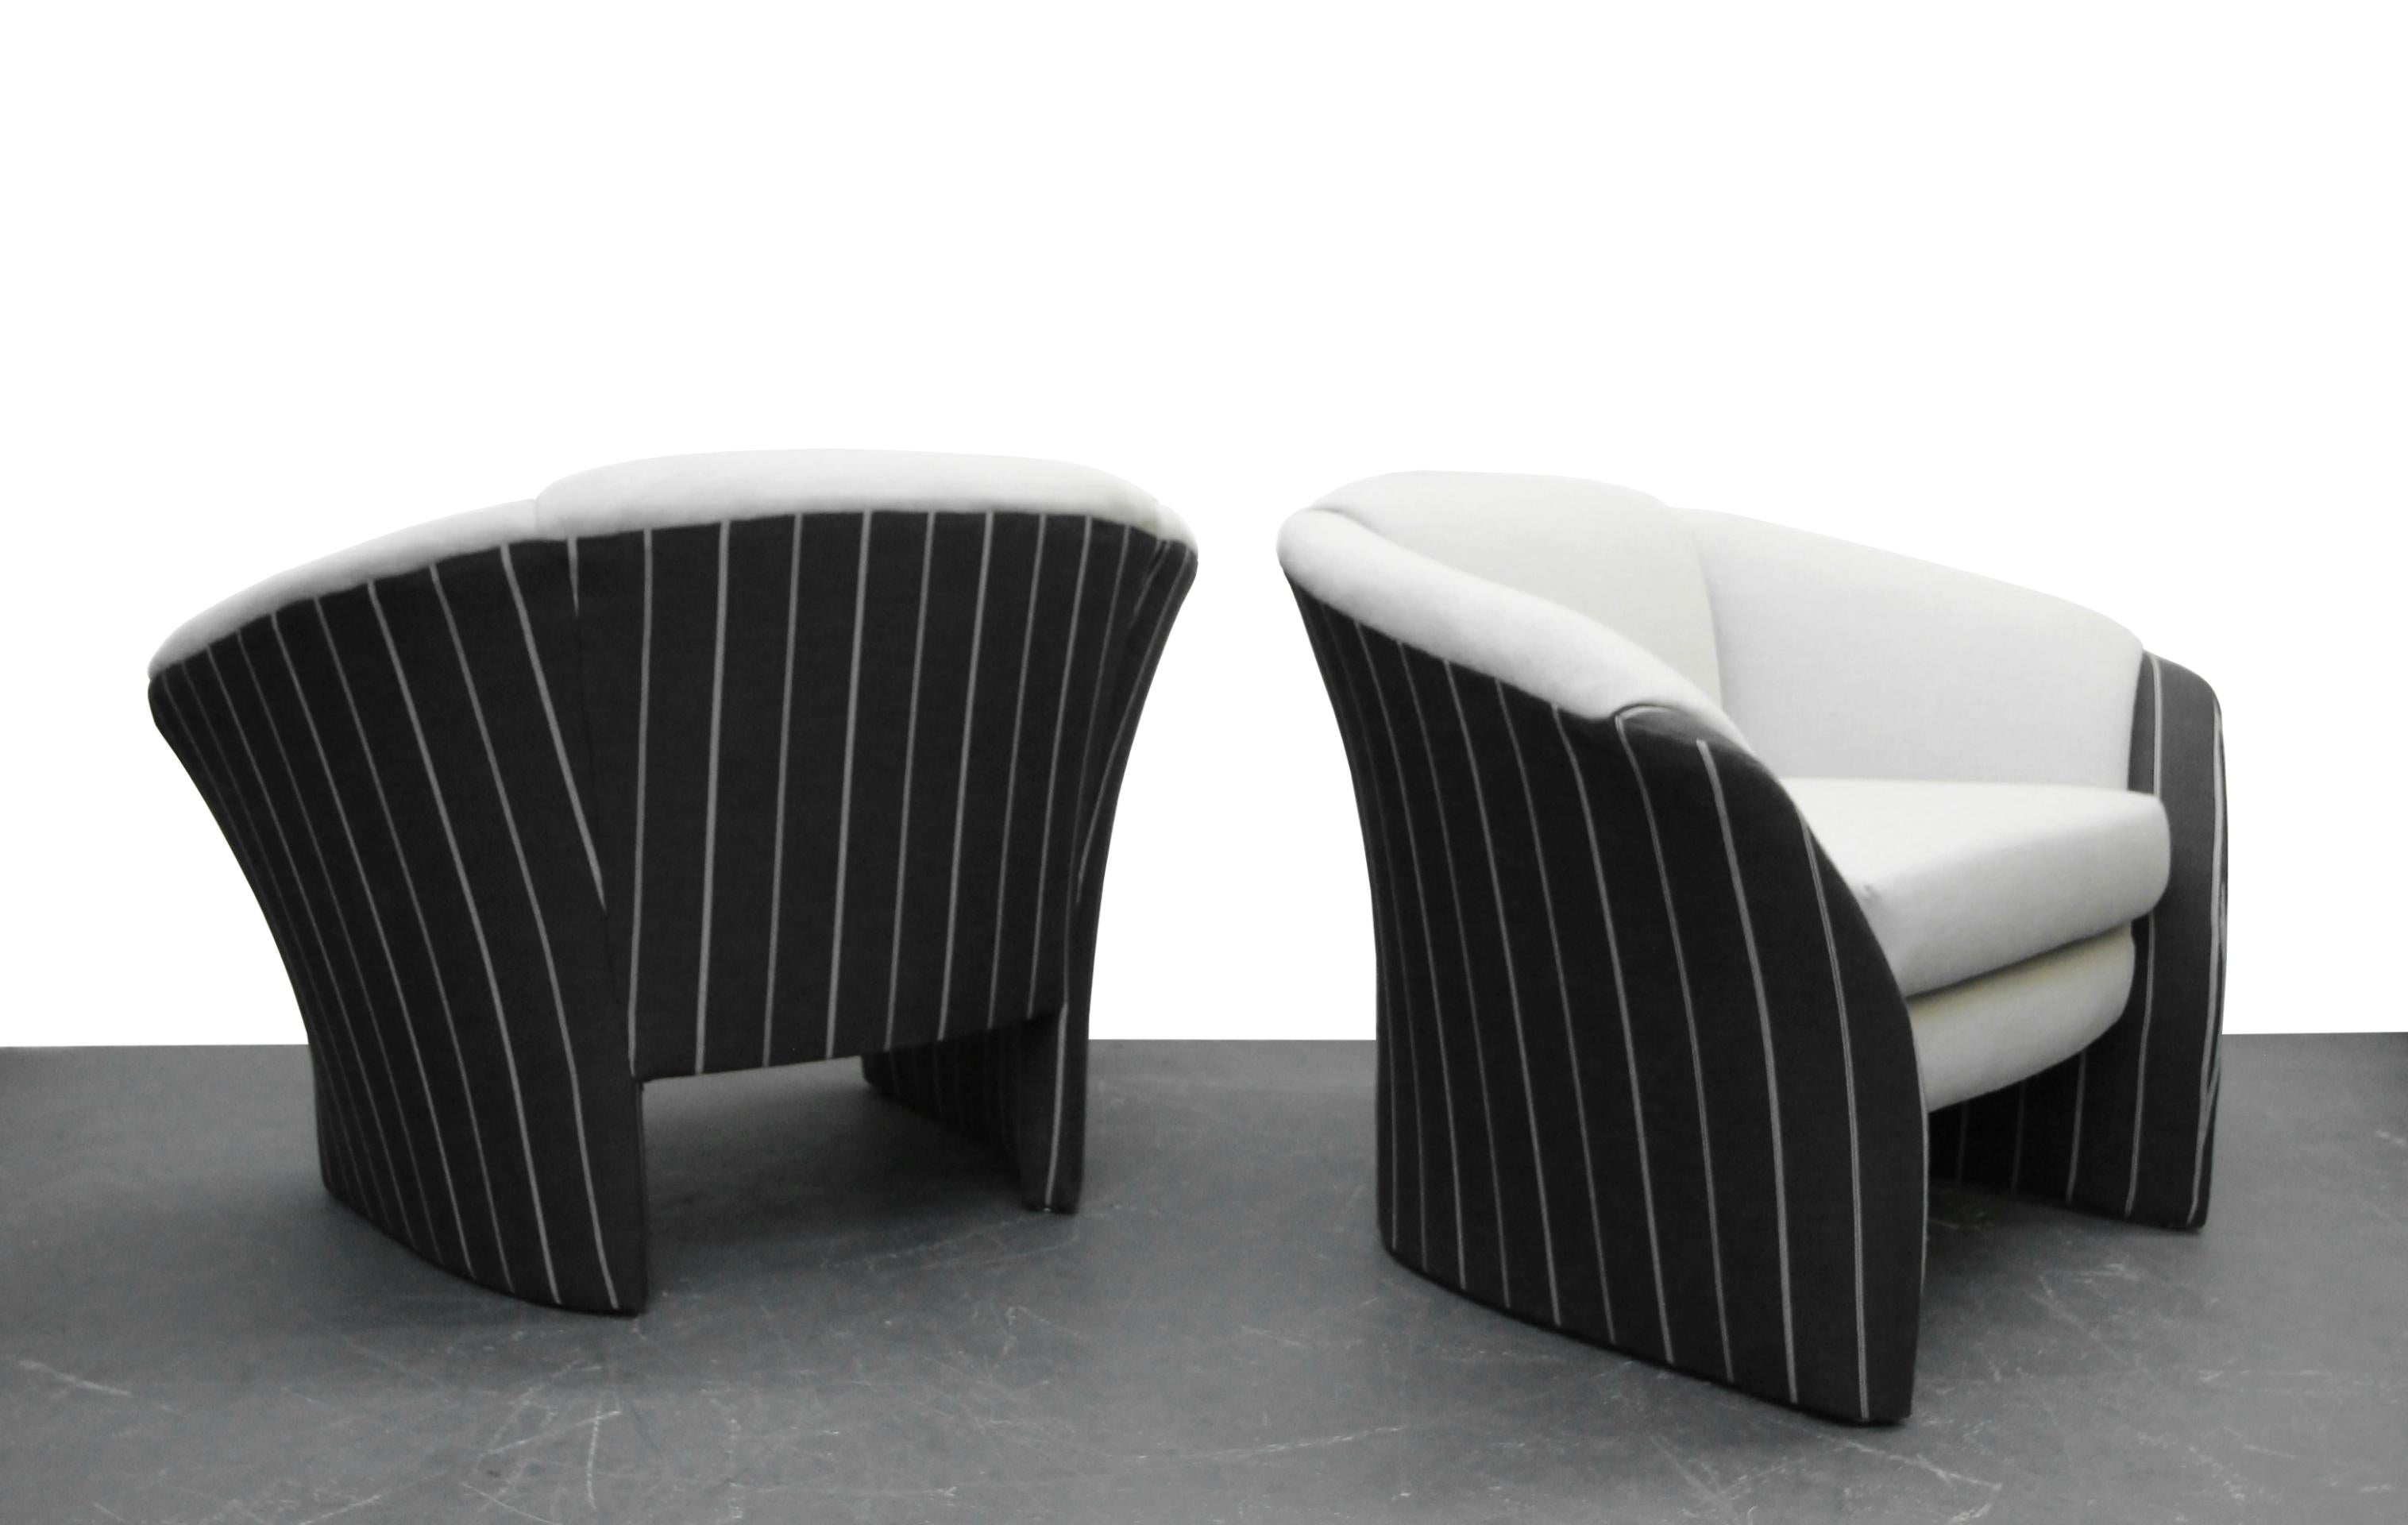 Beautifully restored pair of oversized barrel back lounge chairs with splayed arms. Check out those lines.

Chairs have been restored with all new foam and a handsome pale grey and charcoal grey pinstripe fabric. Ready to go straight to their new